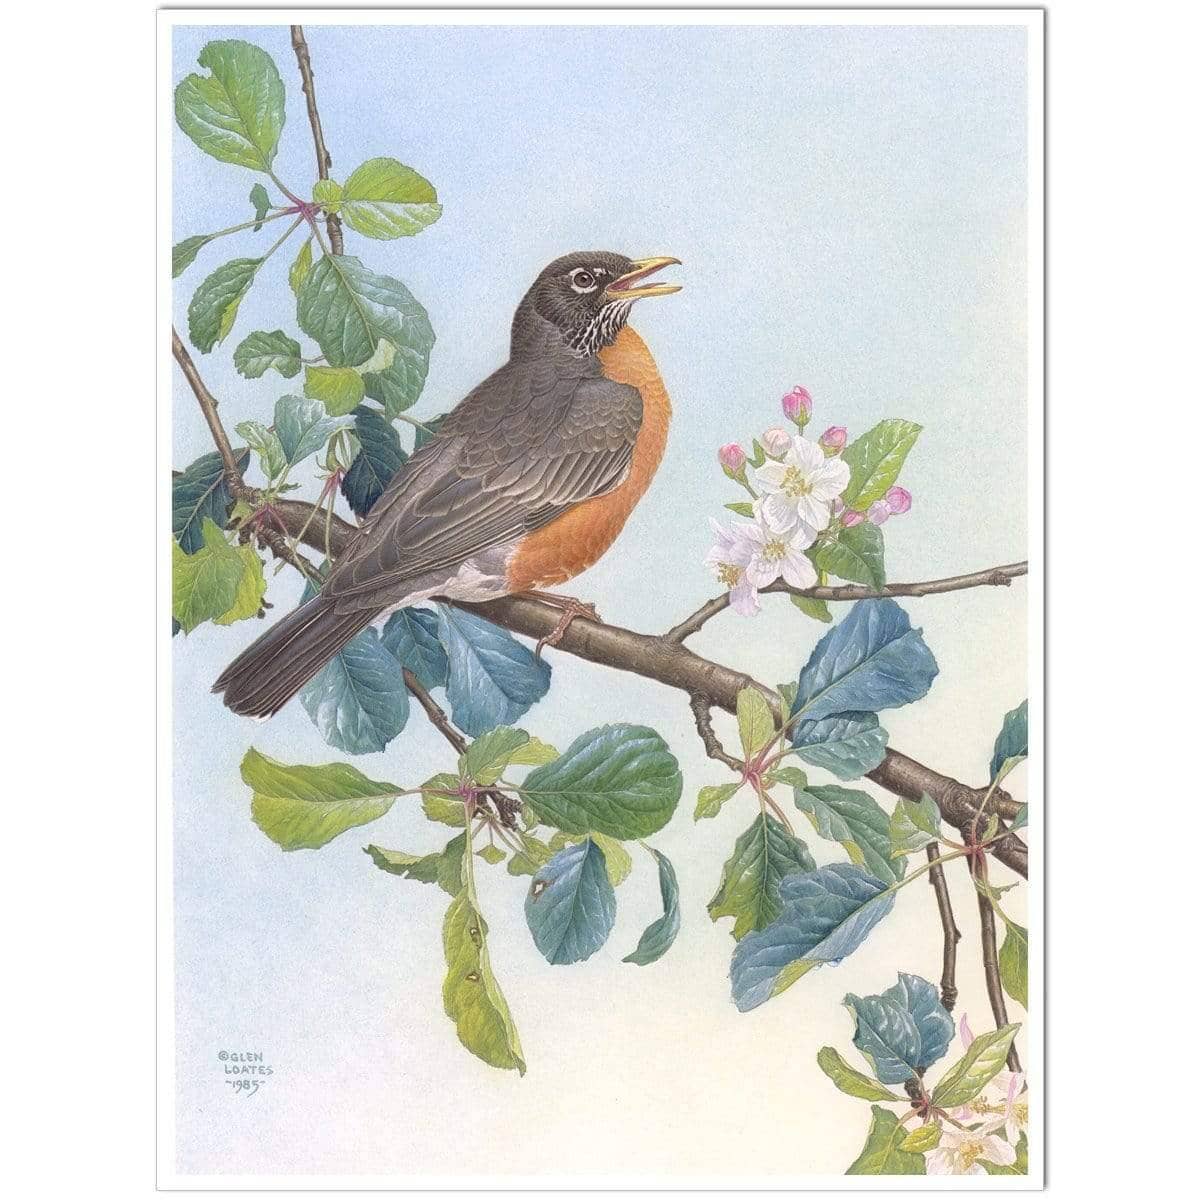 North American Robin with Apple Blossom - Art Print | Artwork by Glen Loates